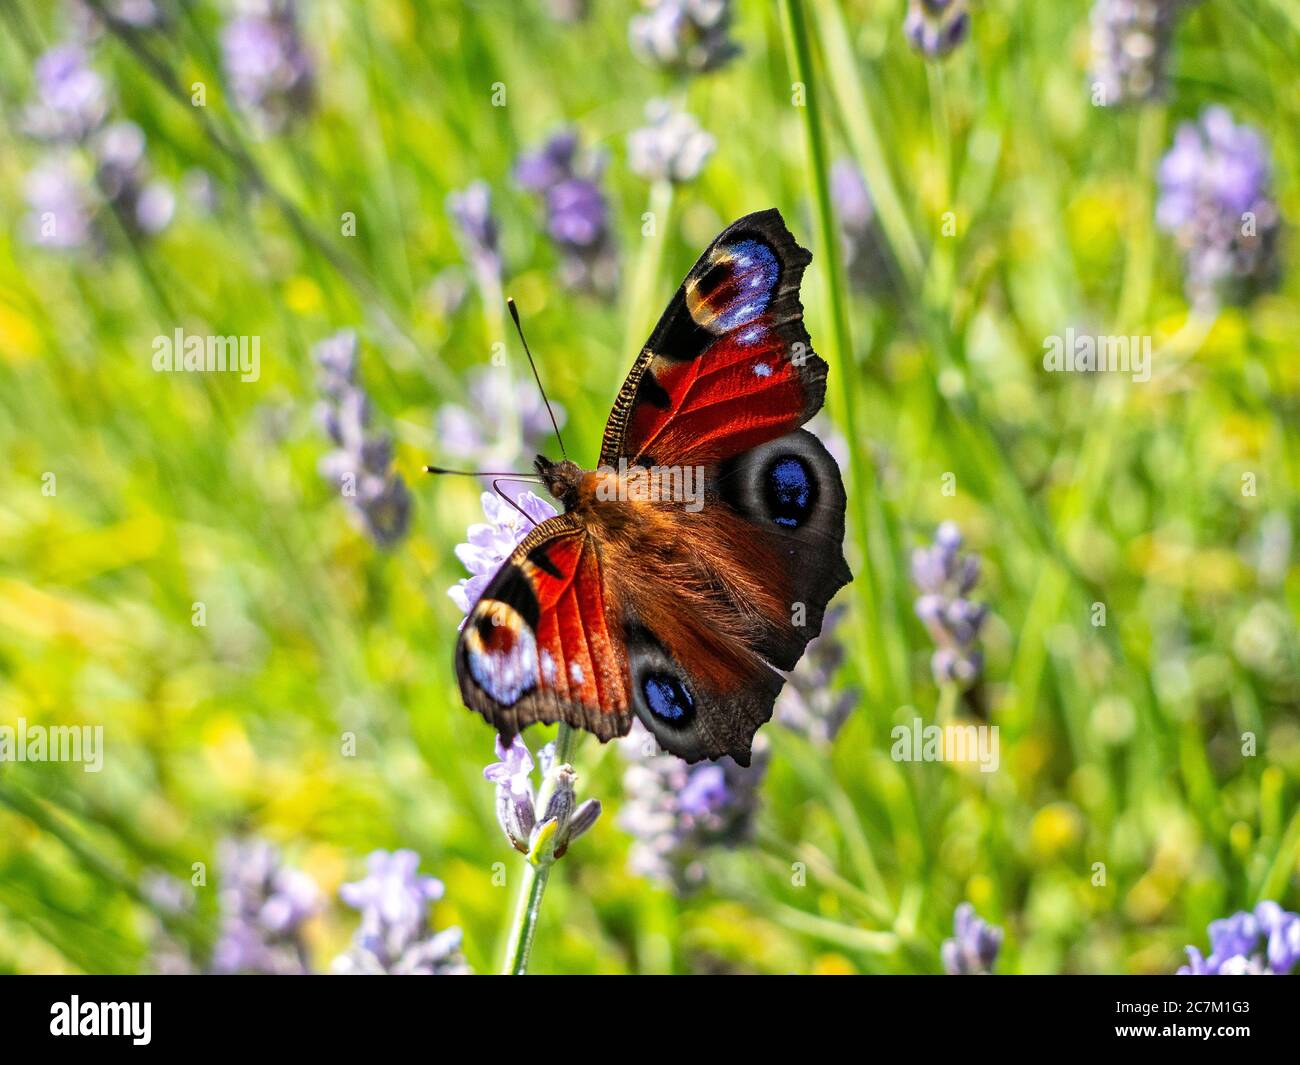 Peacock butterfly on lavender. Stock Photo